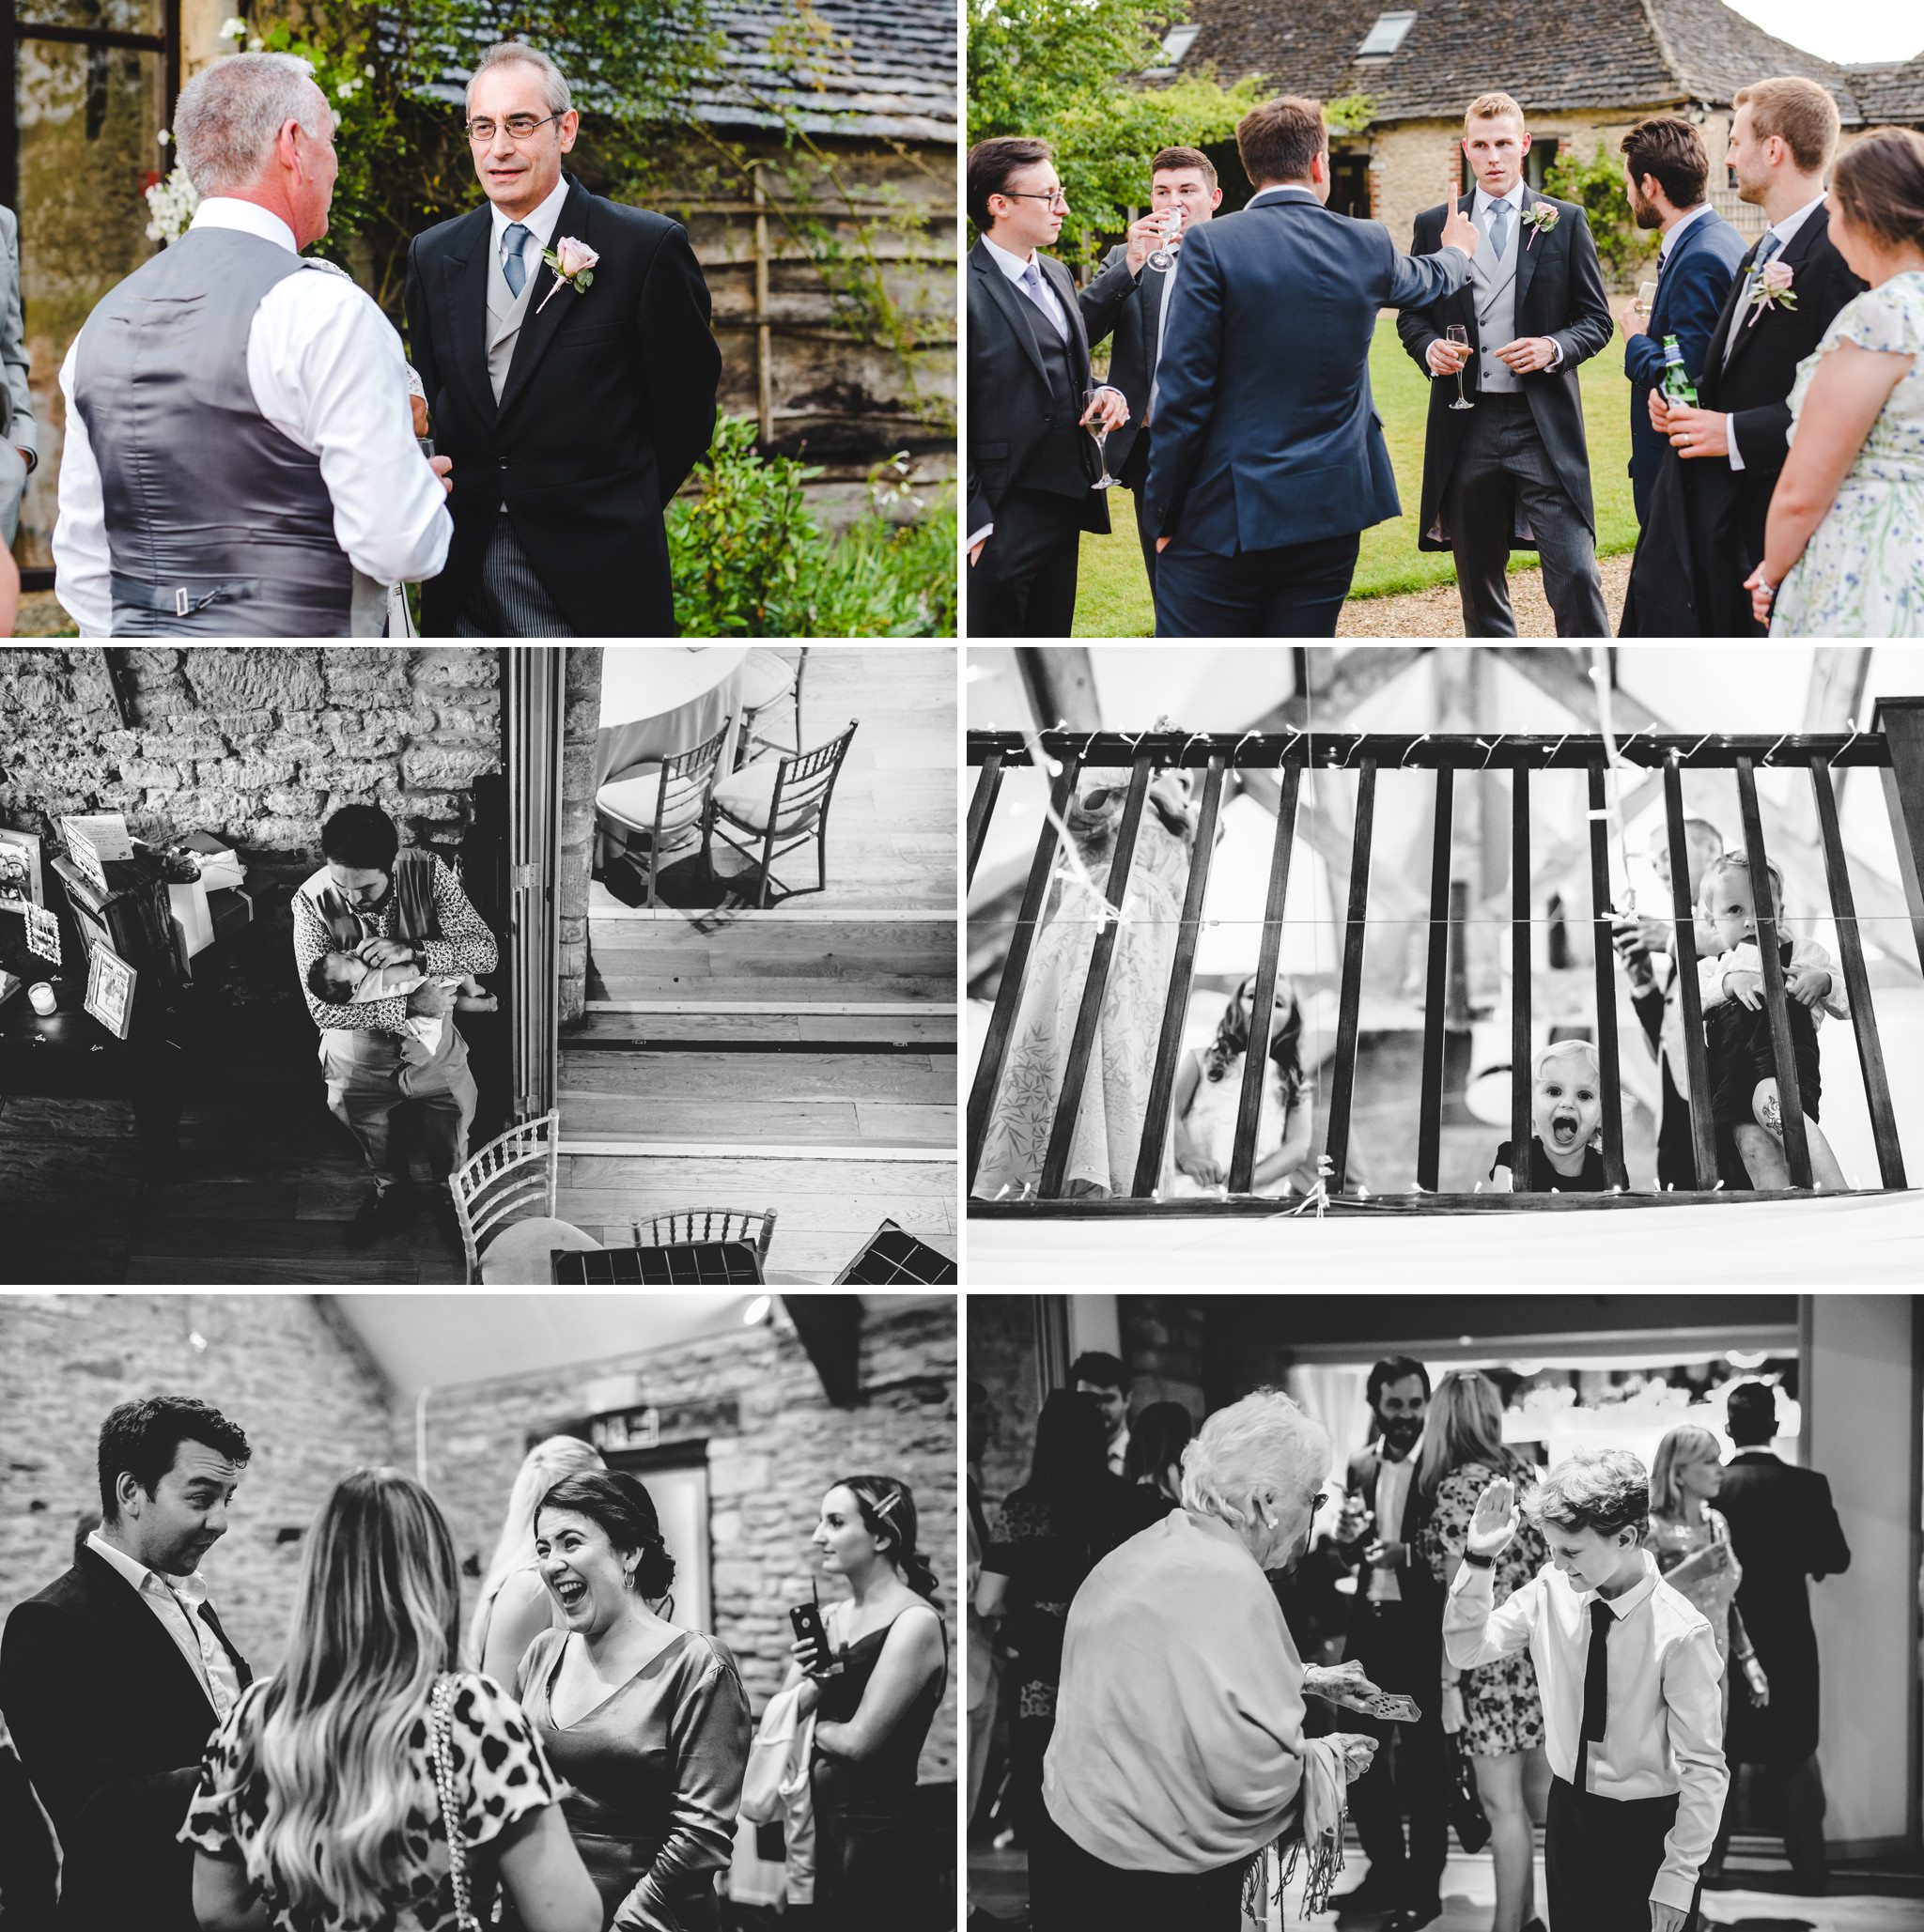 Candid photography at a wedding in Gloucestershire